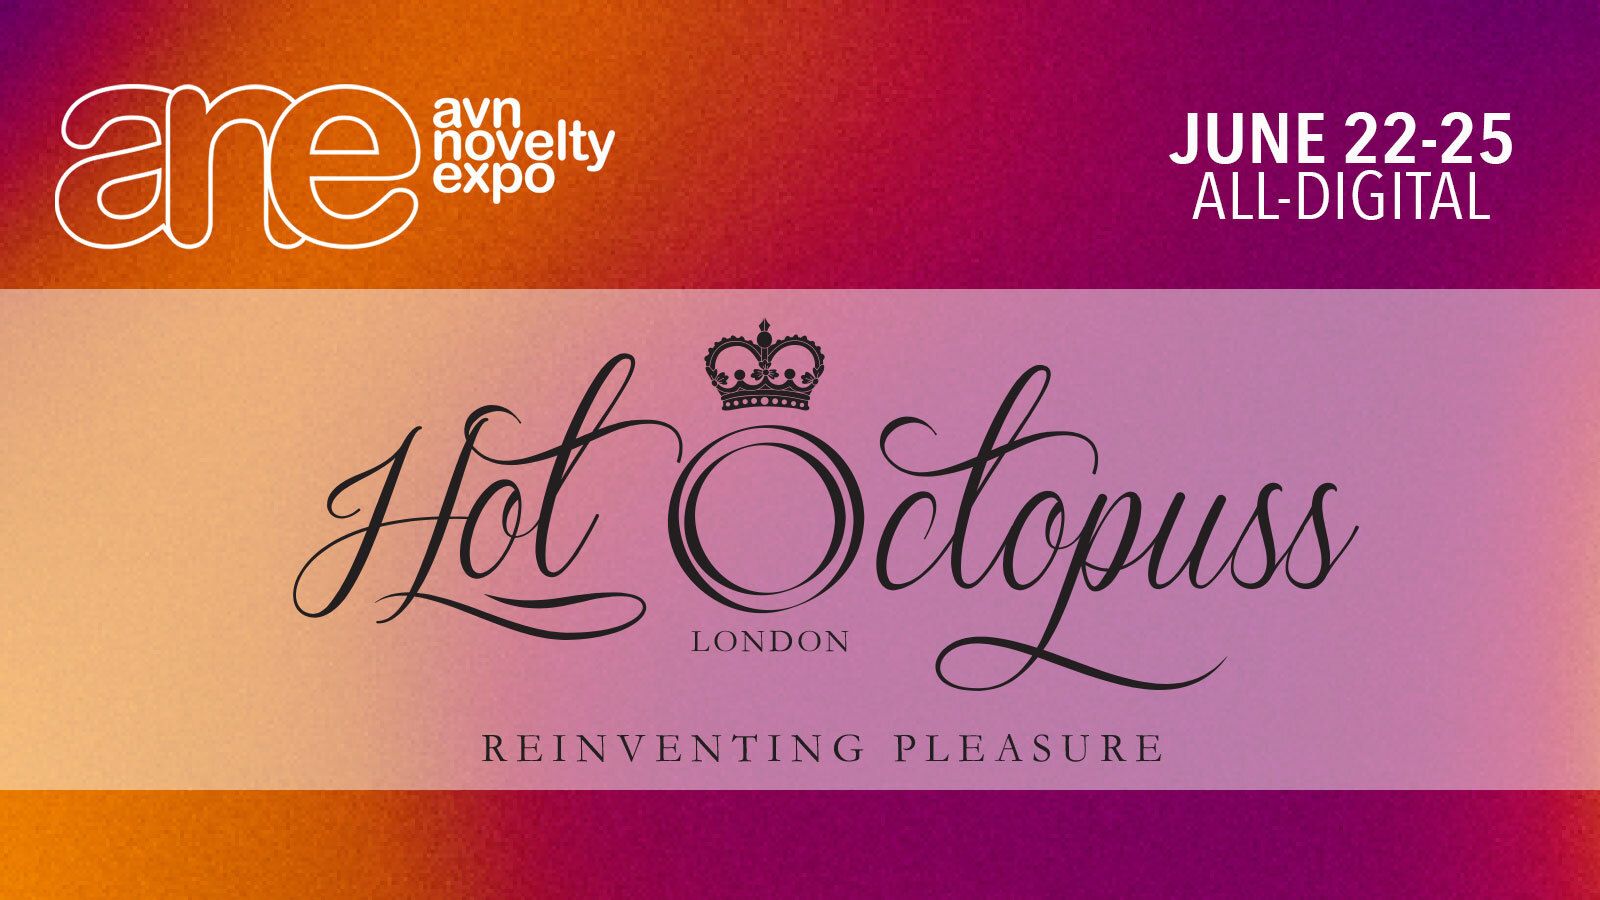 Hot Octopuss Ramps Up for ANE Summer